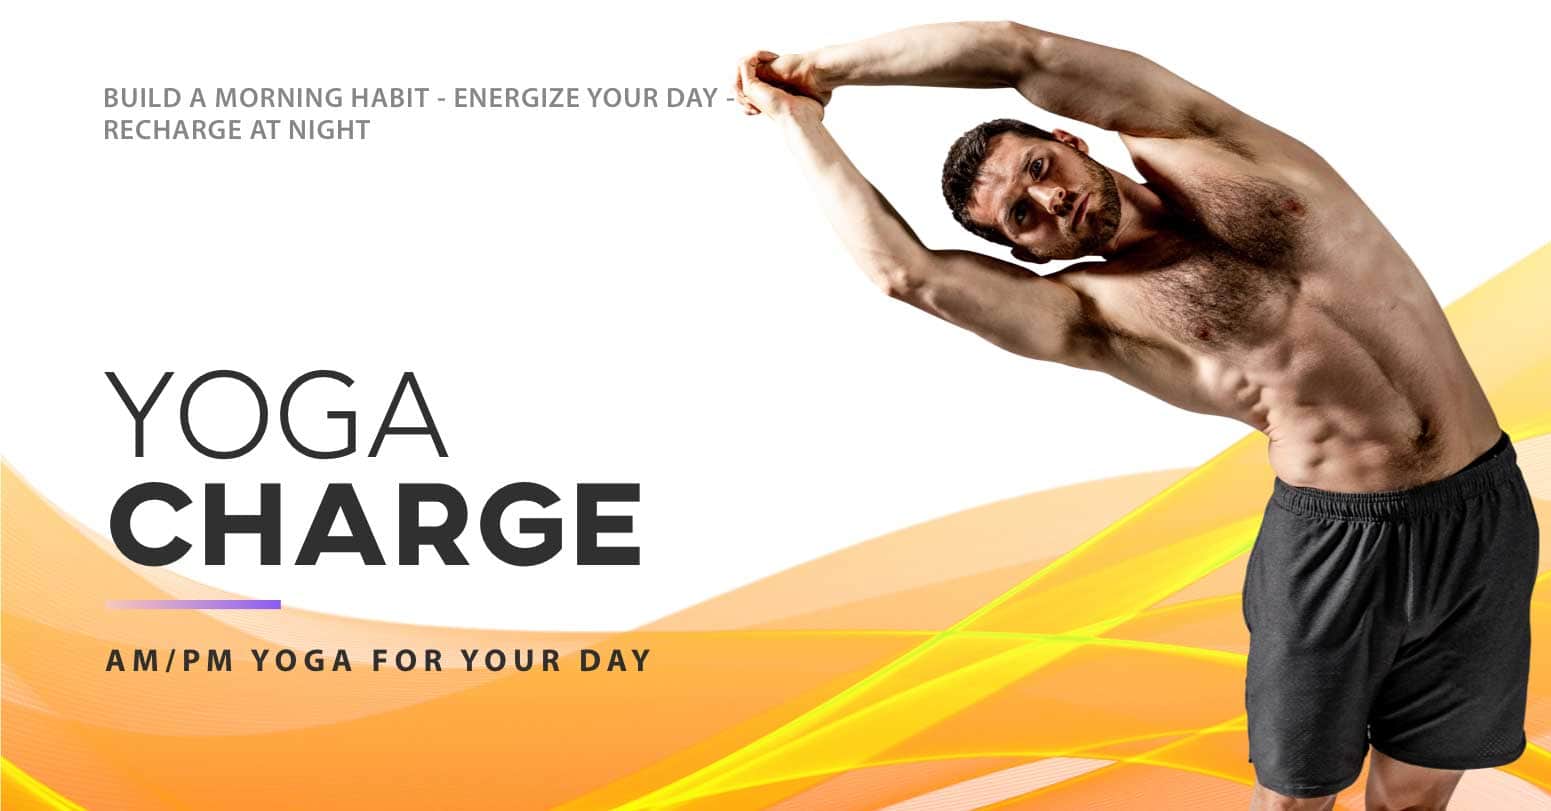 Yoga Charge – AM/PM Yoga For Your Day